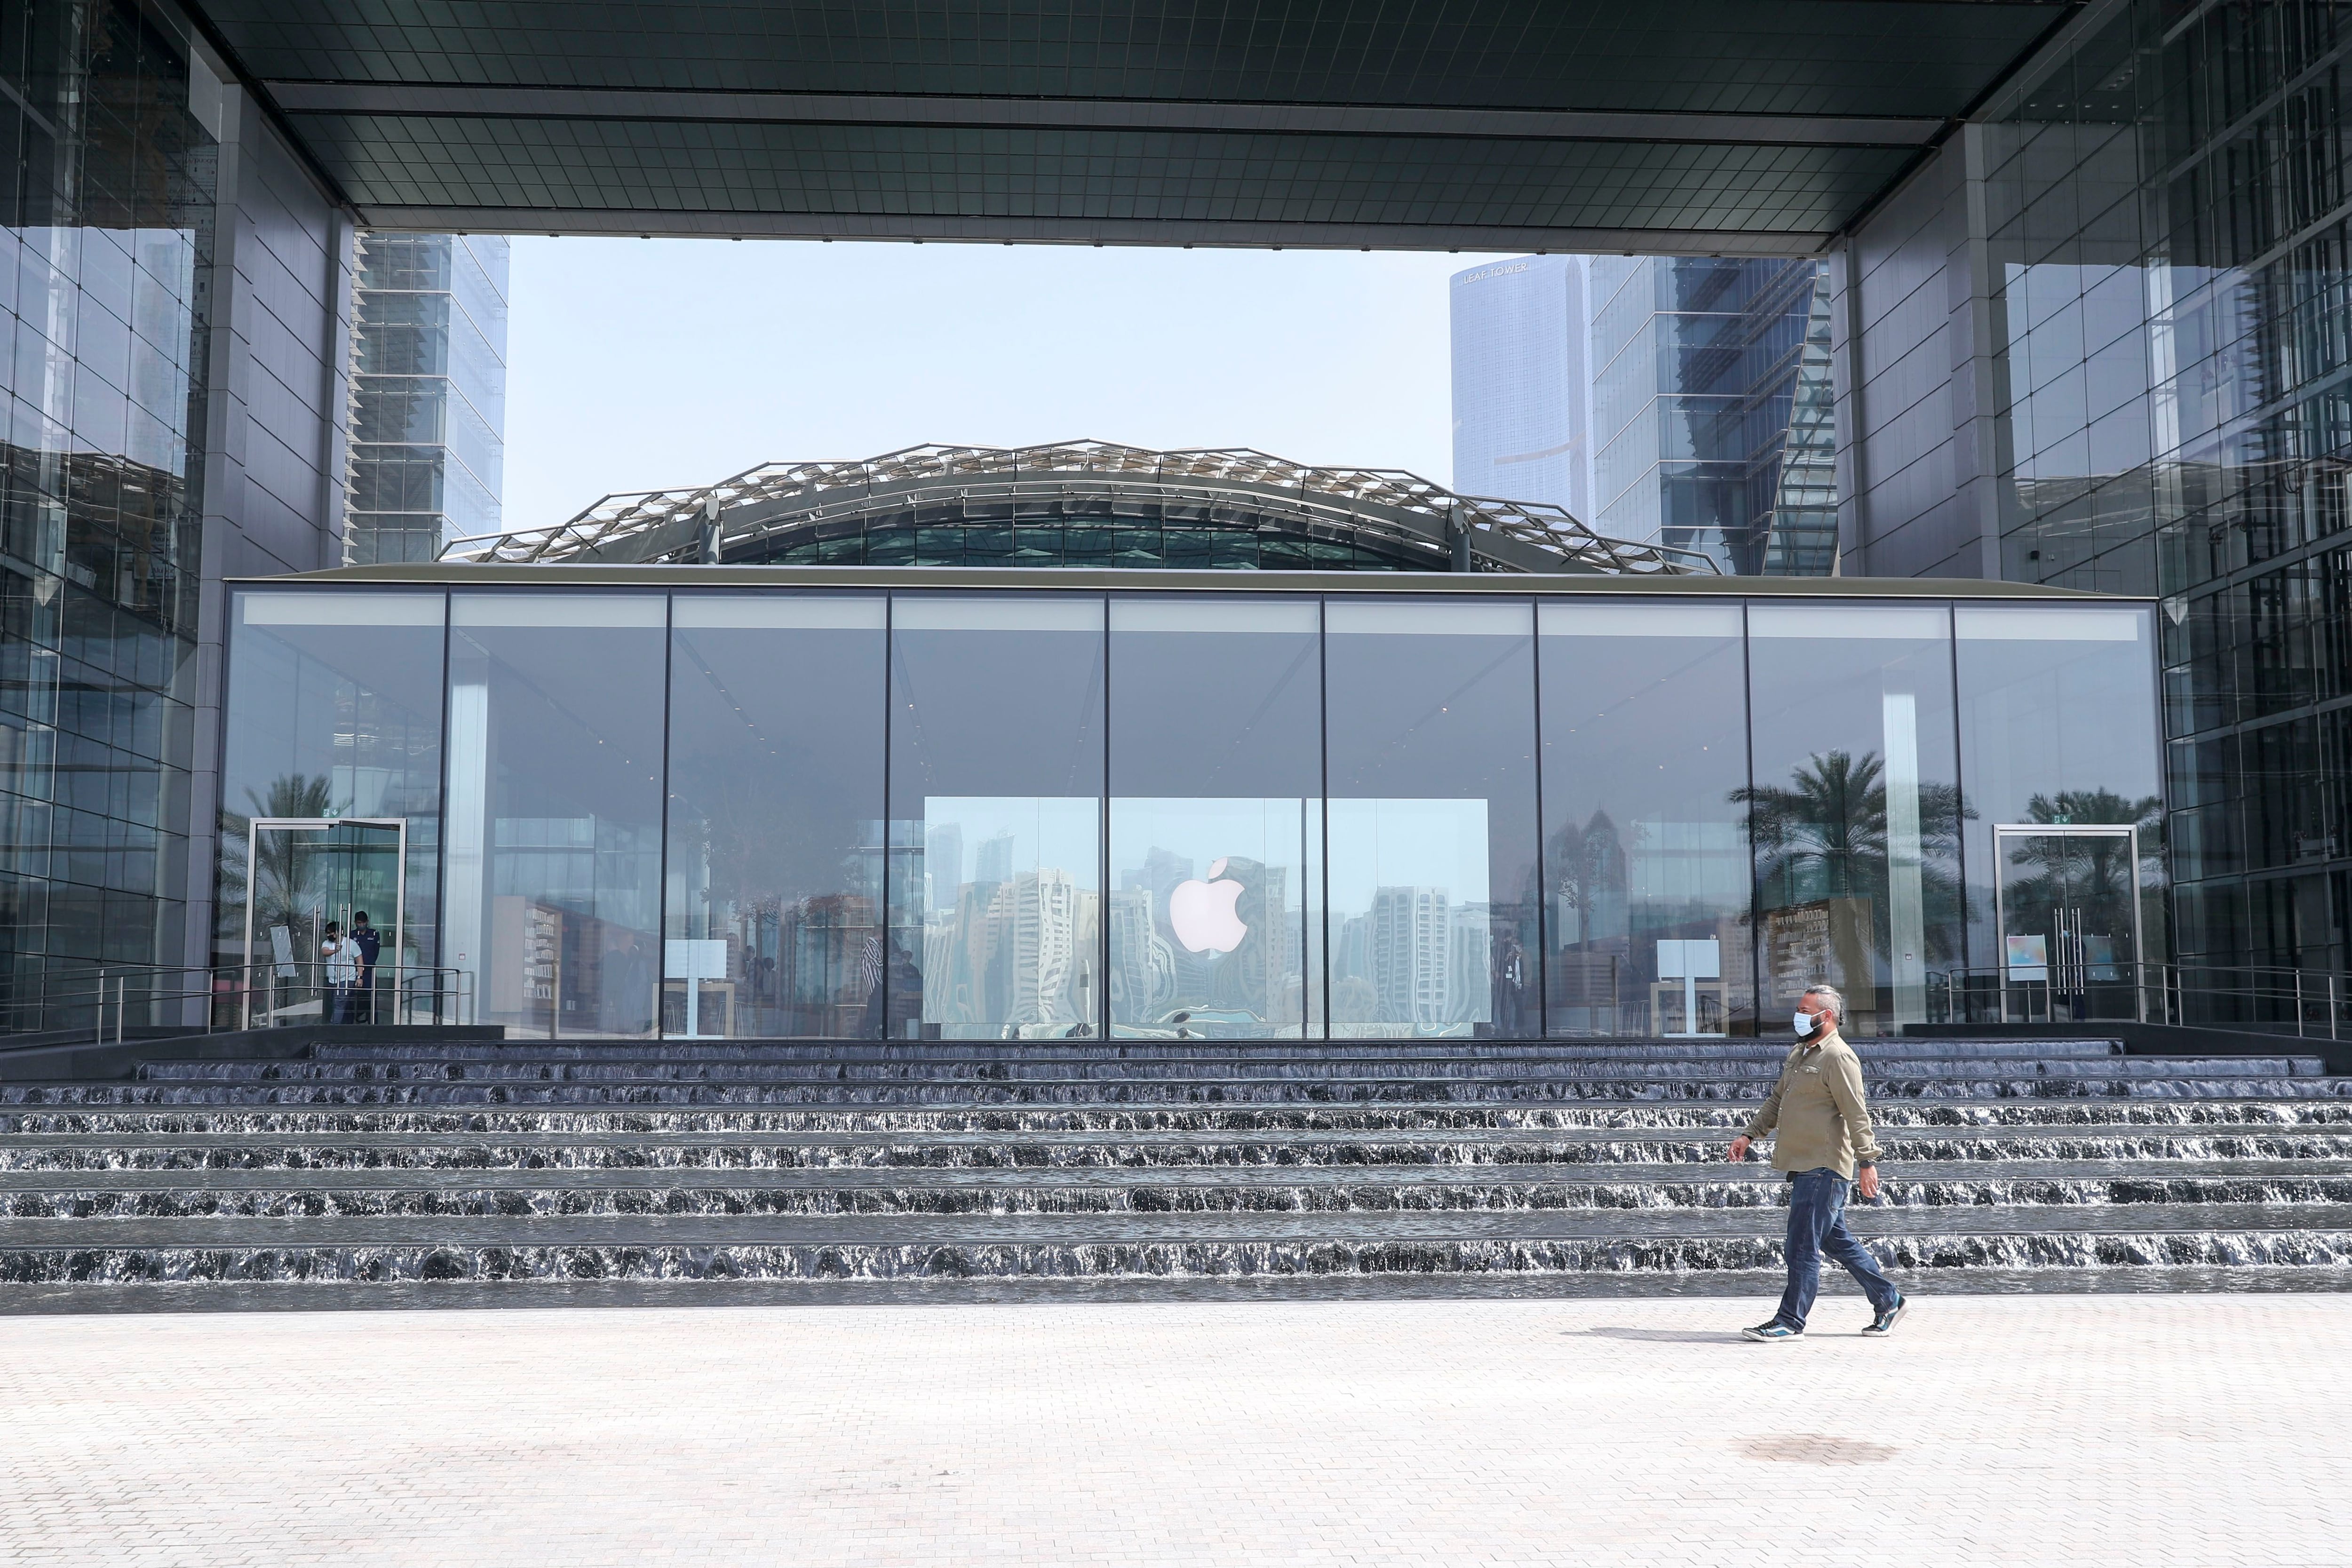 Apple Highlights Success of its Stores in the UAE